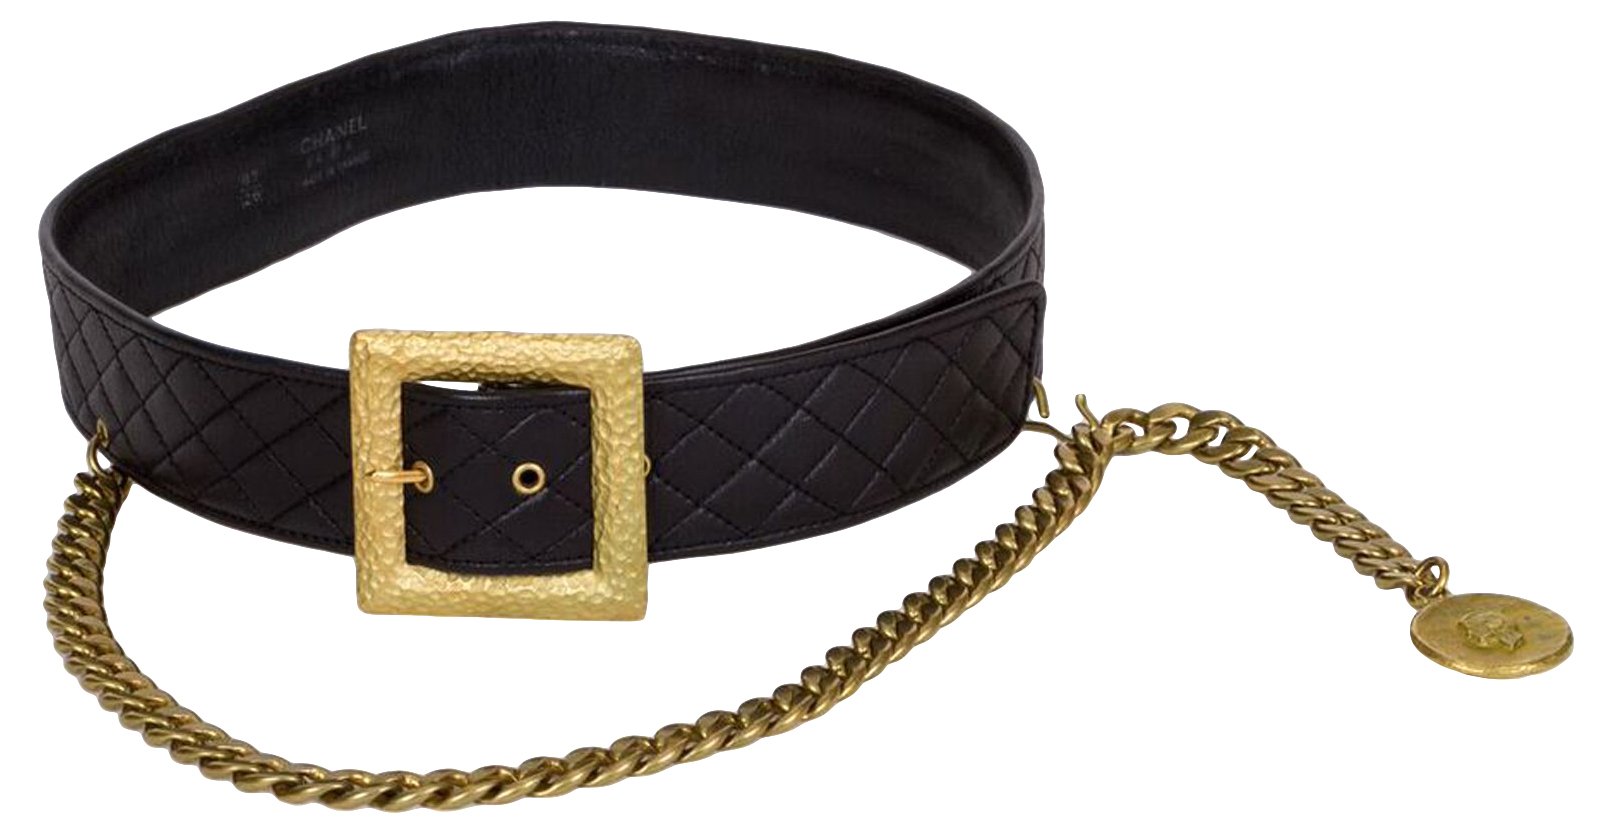 CHANEL Quilted Leather Gold Chain Buckle Belt Black